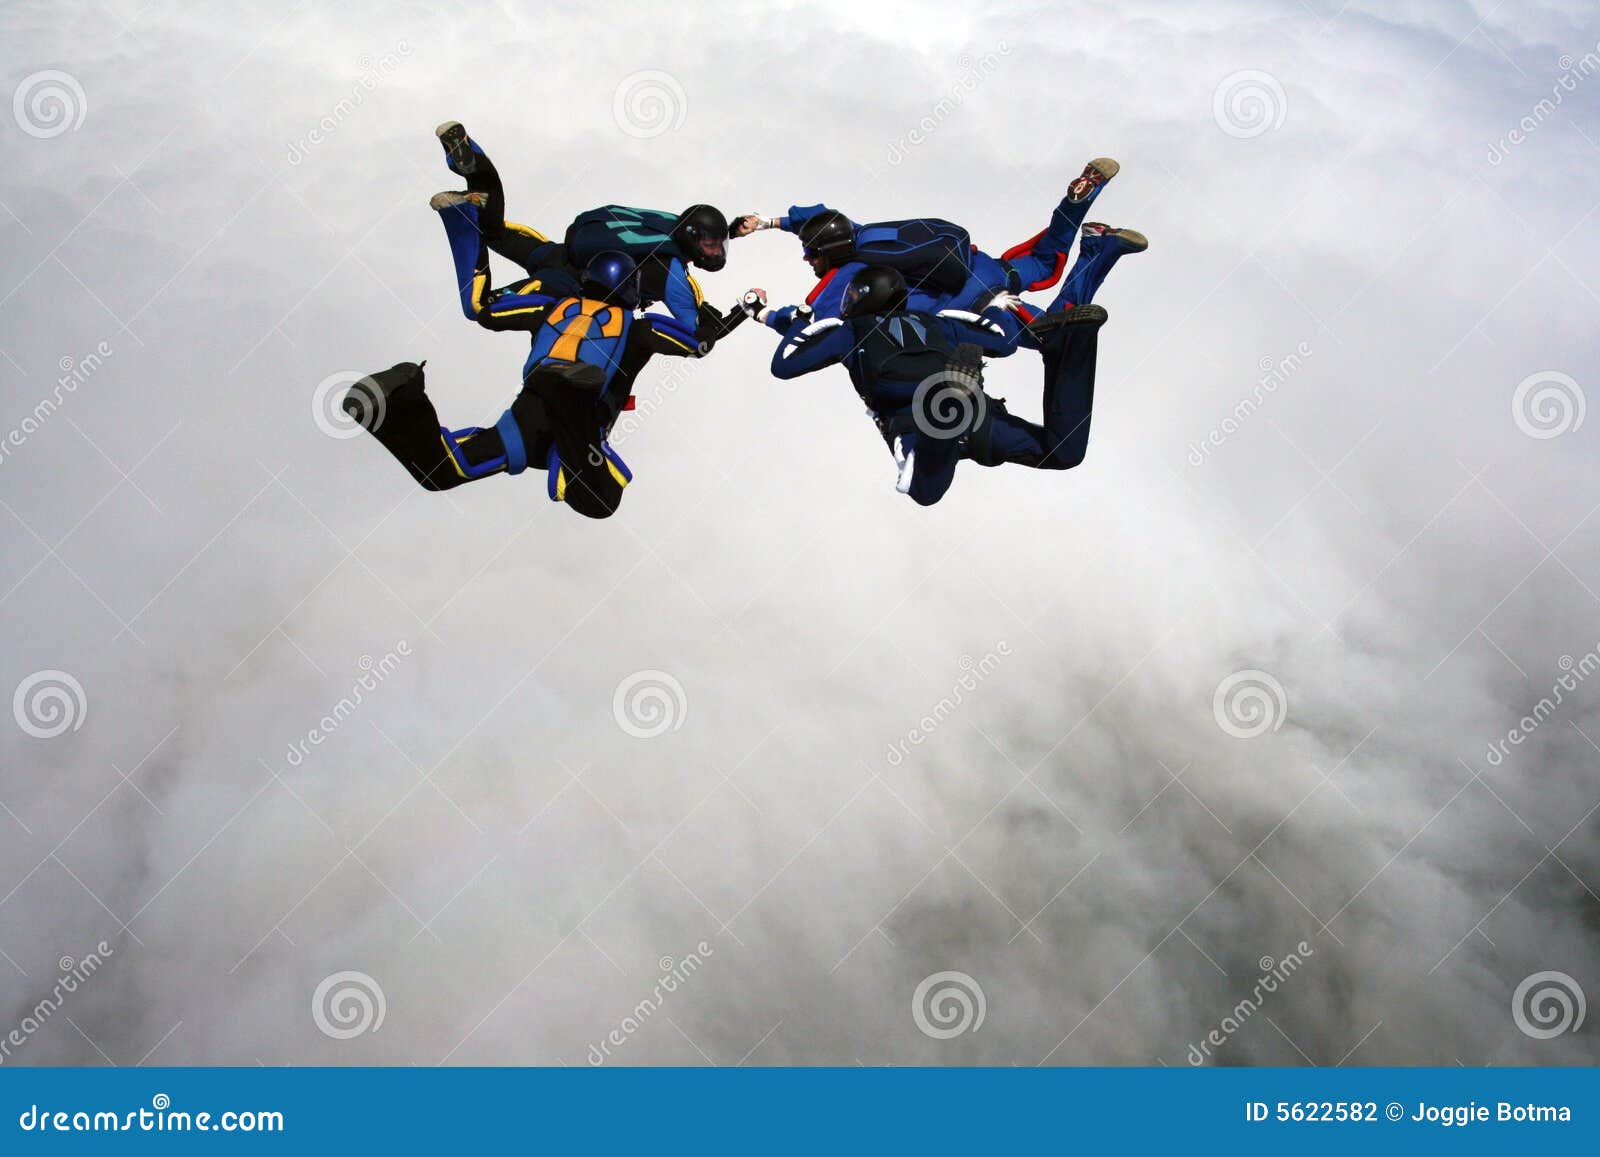 four skydivers